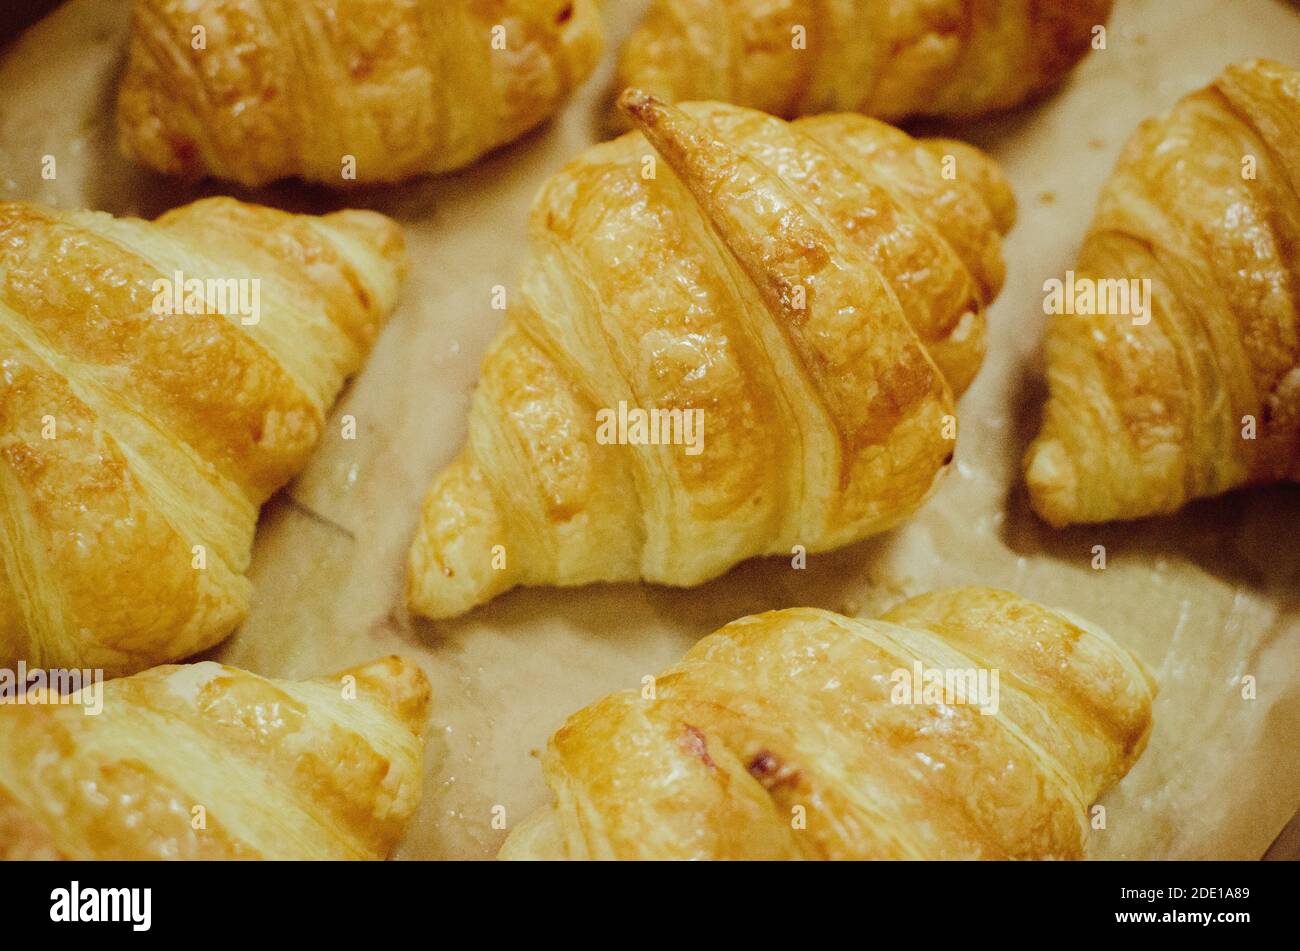 assorted croissant freshly baked from the oven Stock Photo